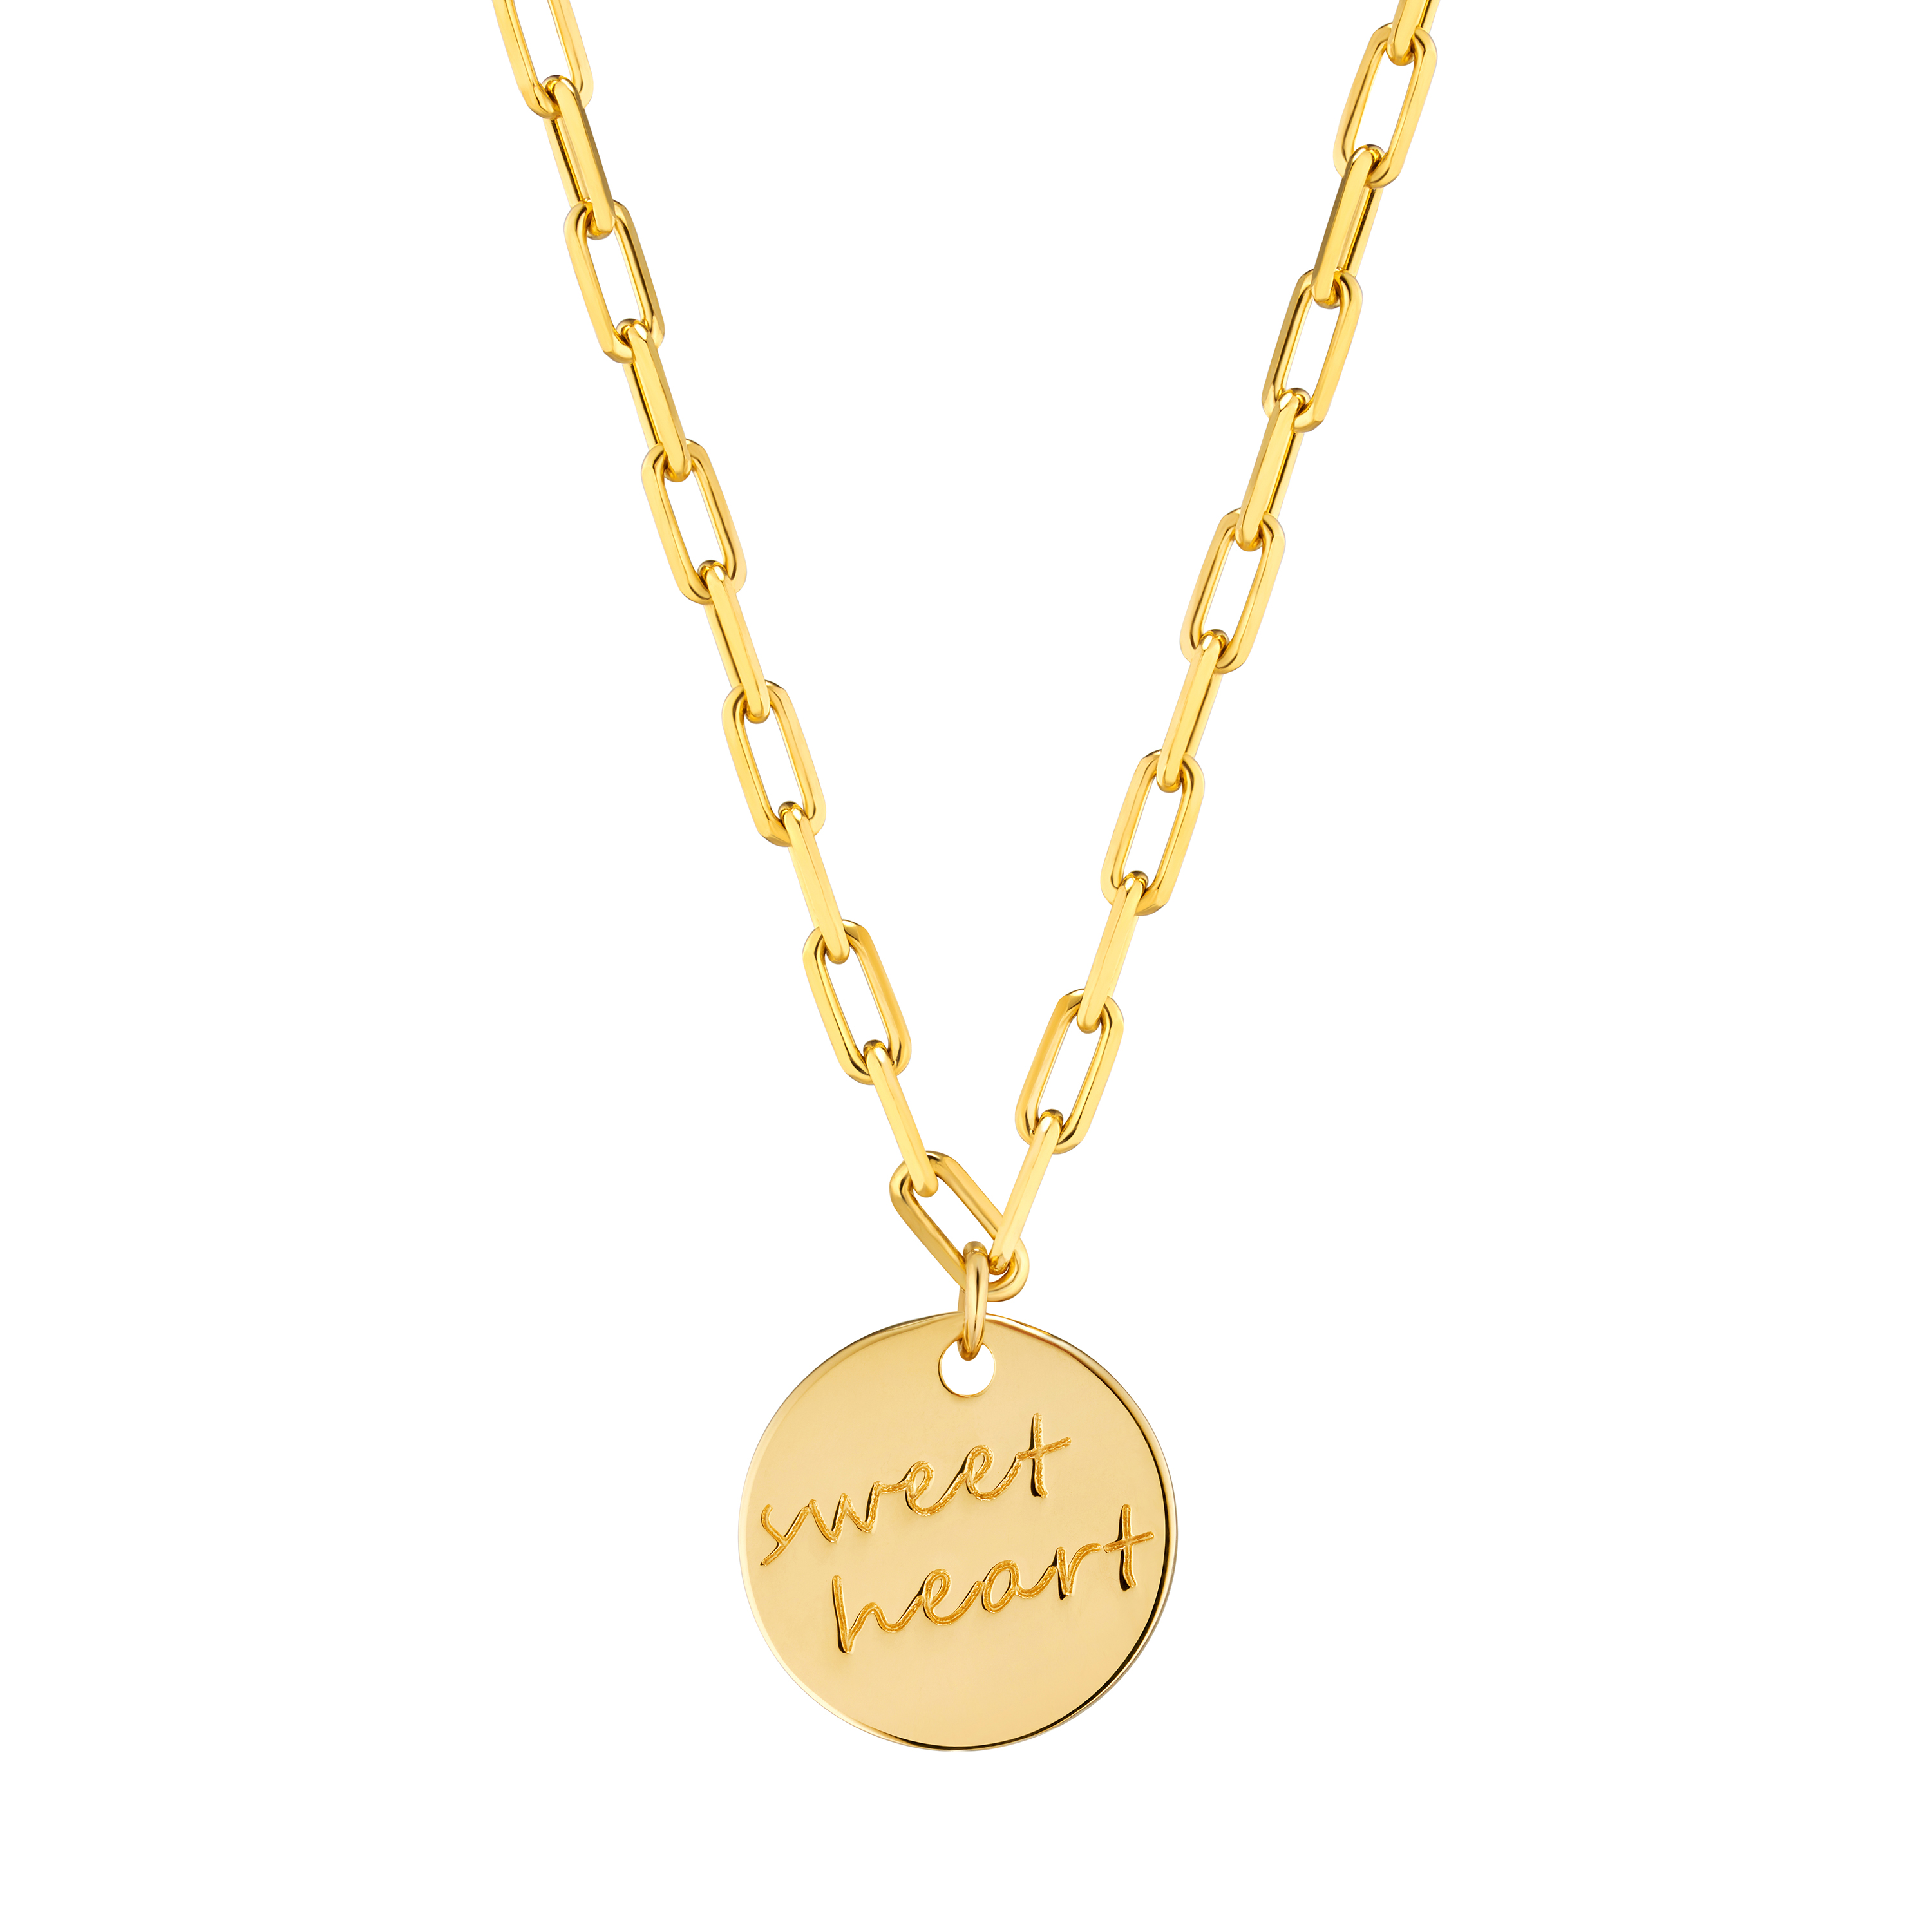 "Sweet Heart" Gold Necklace